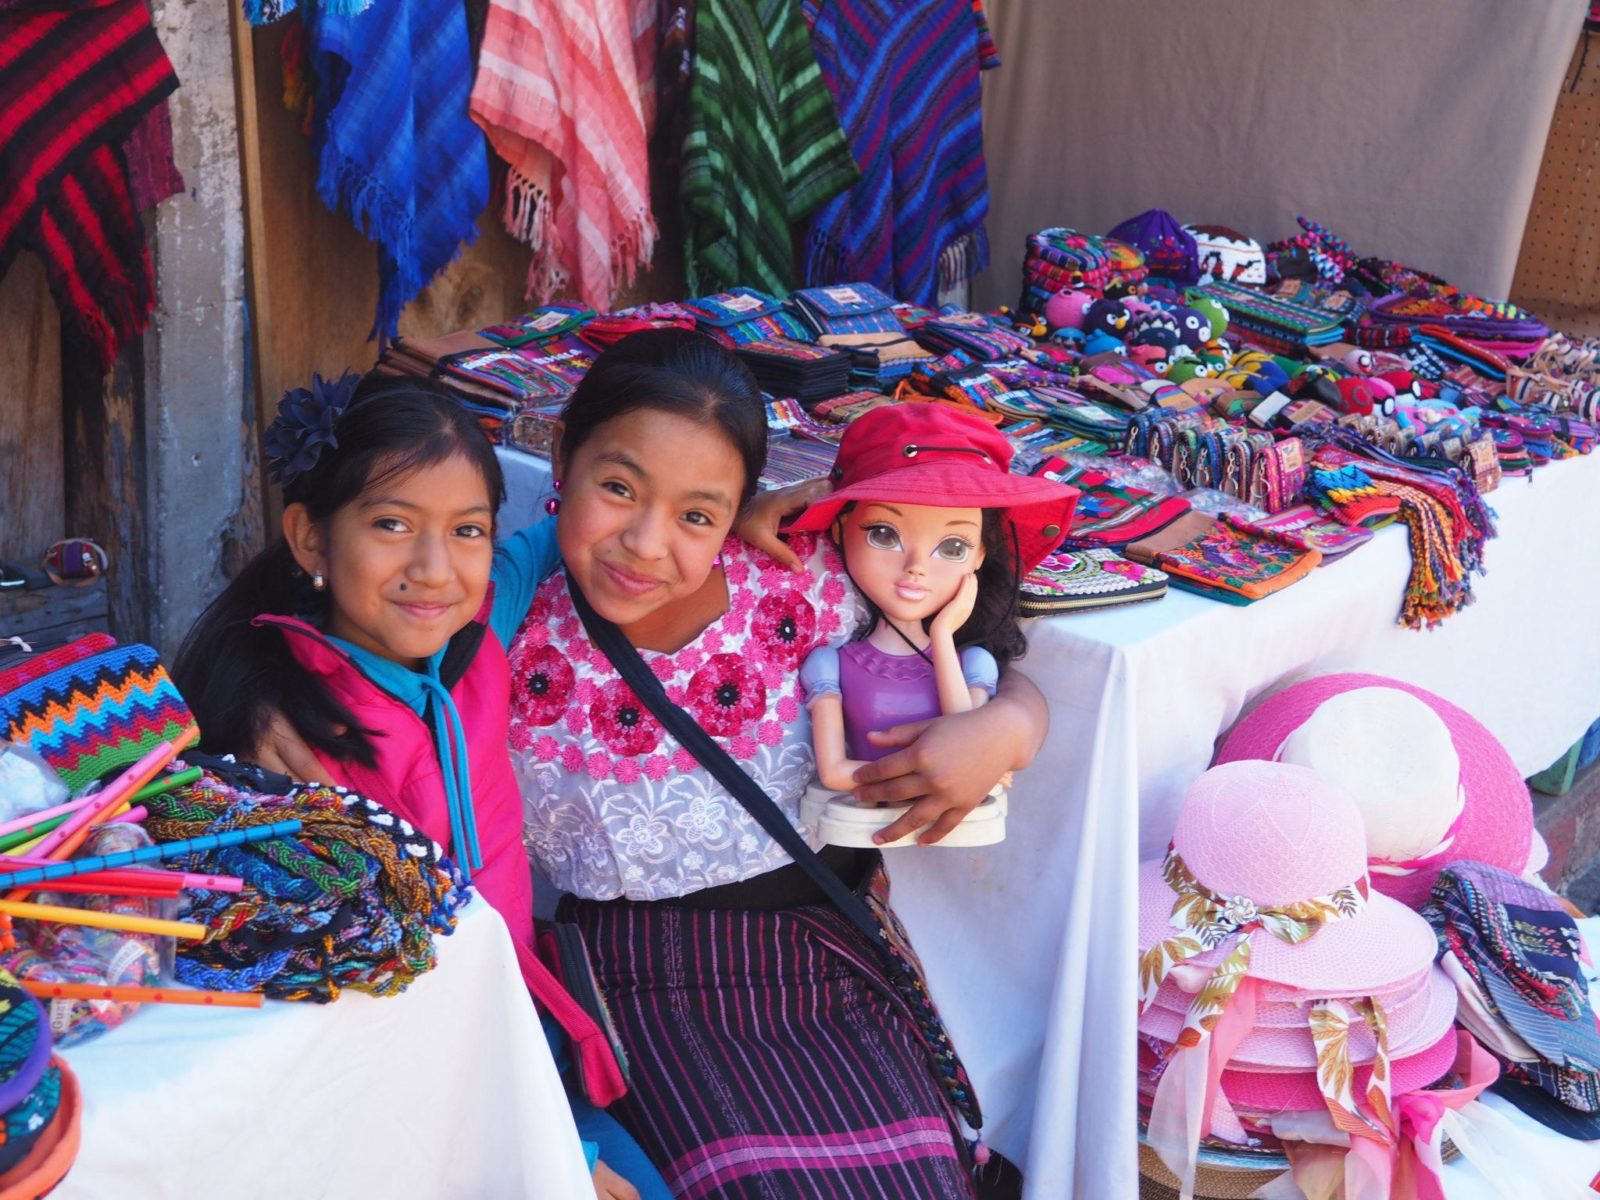 Guatemala Travel Requirements: Tips for Planning a Guatemala Trip